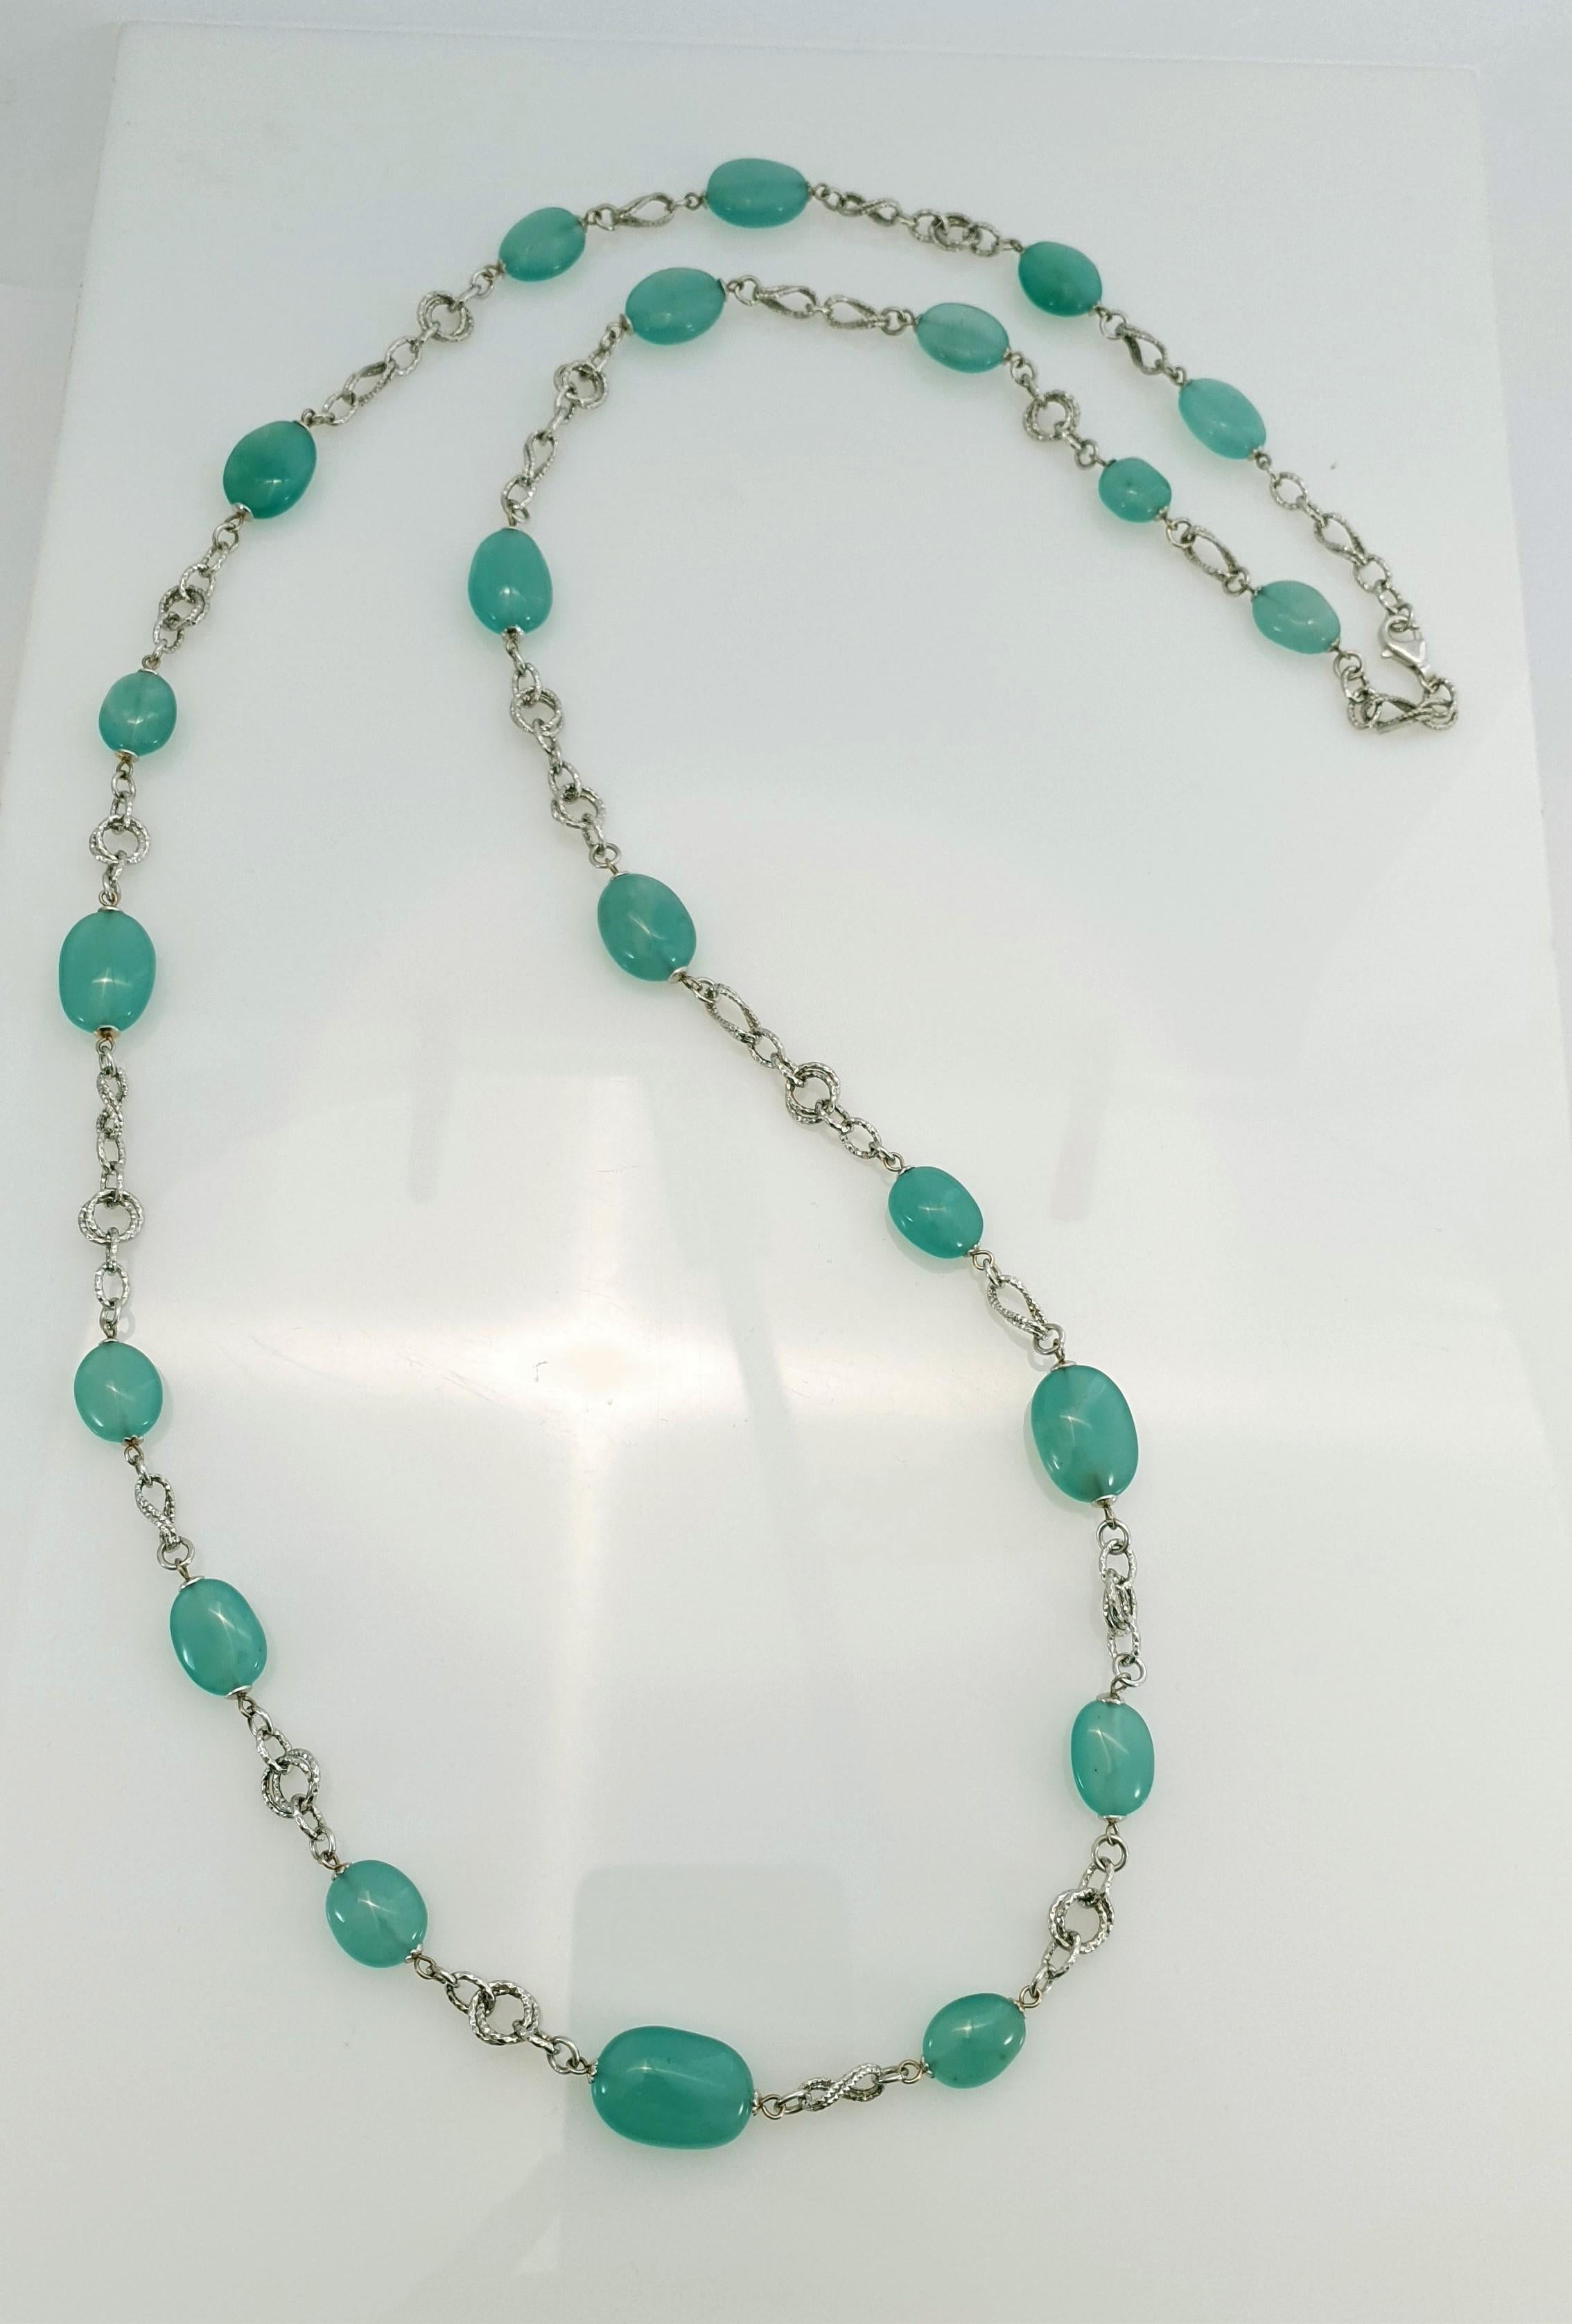 Green Chalcedony Baroque Bead Necklace with 18 Carat White Gold For Sale 7